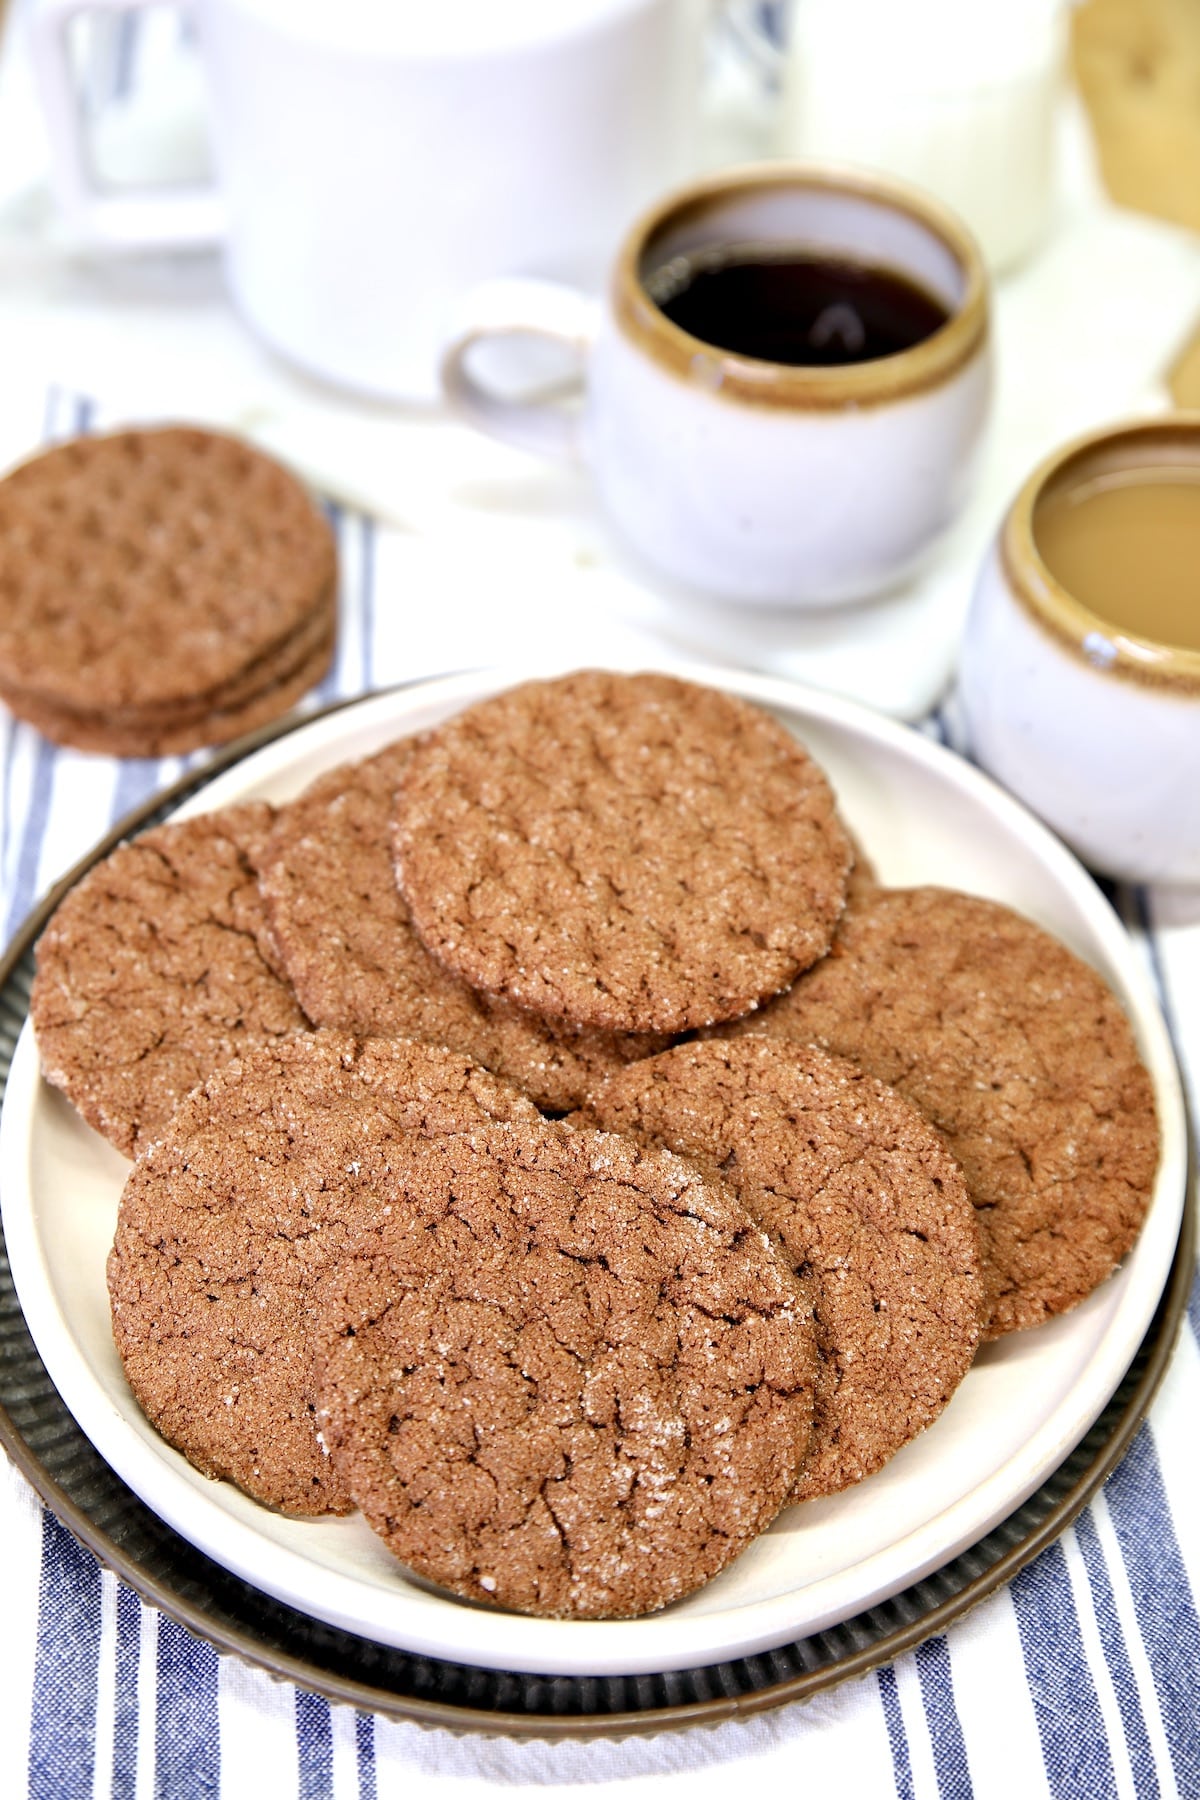 Plate of chocolate cookies with coffee cups.